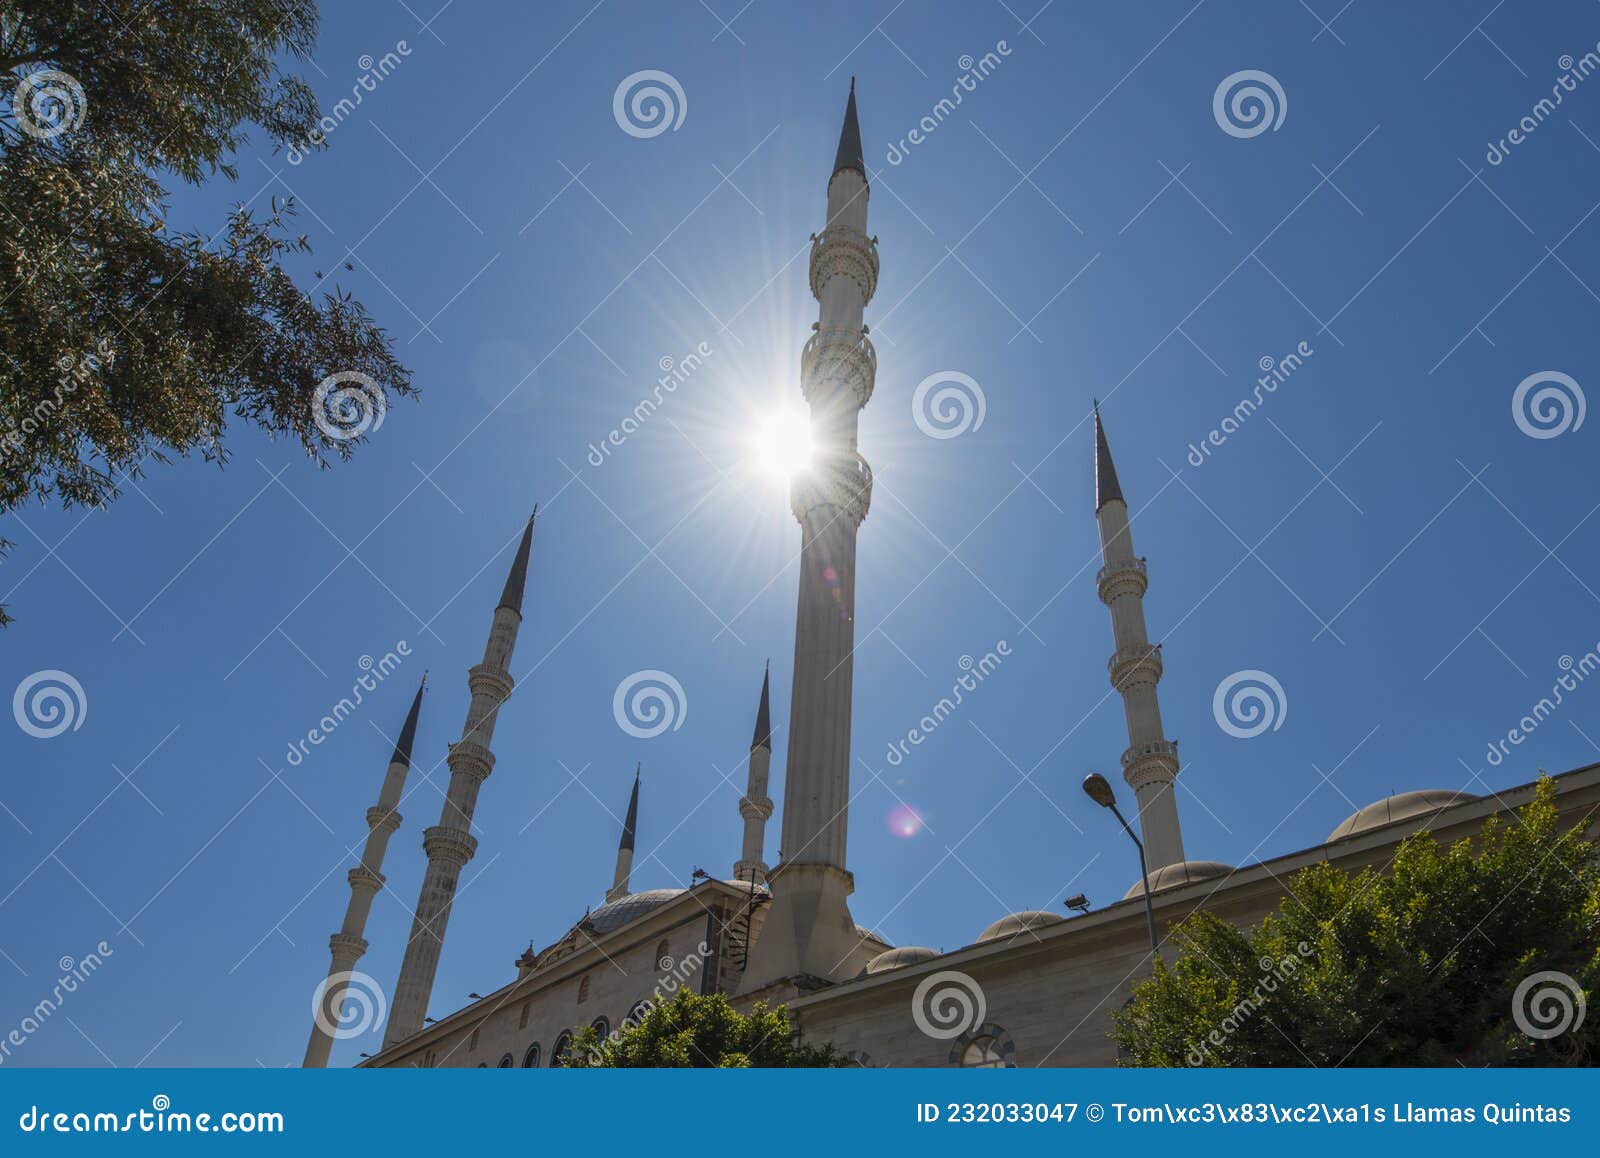 minarets of the muslim mosque of mersin built with ottoman architecture